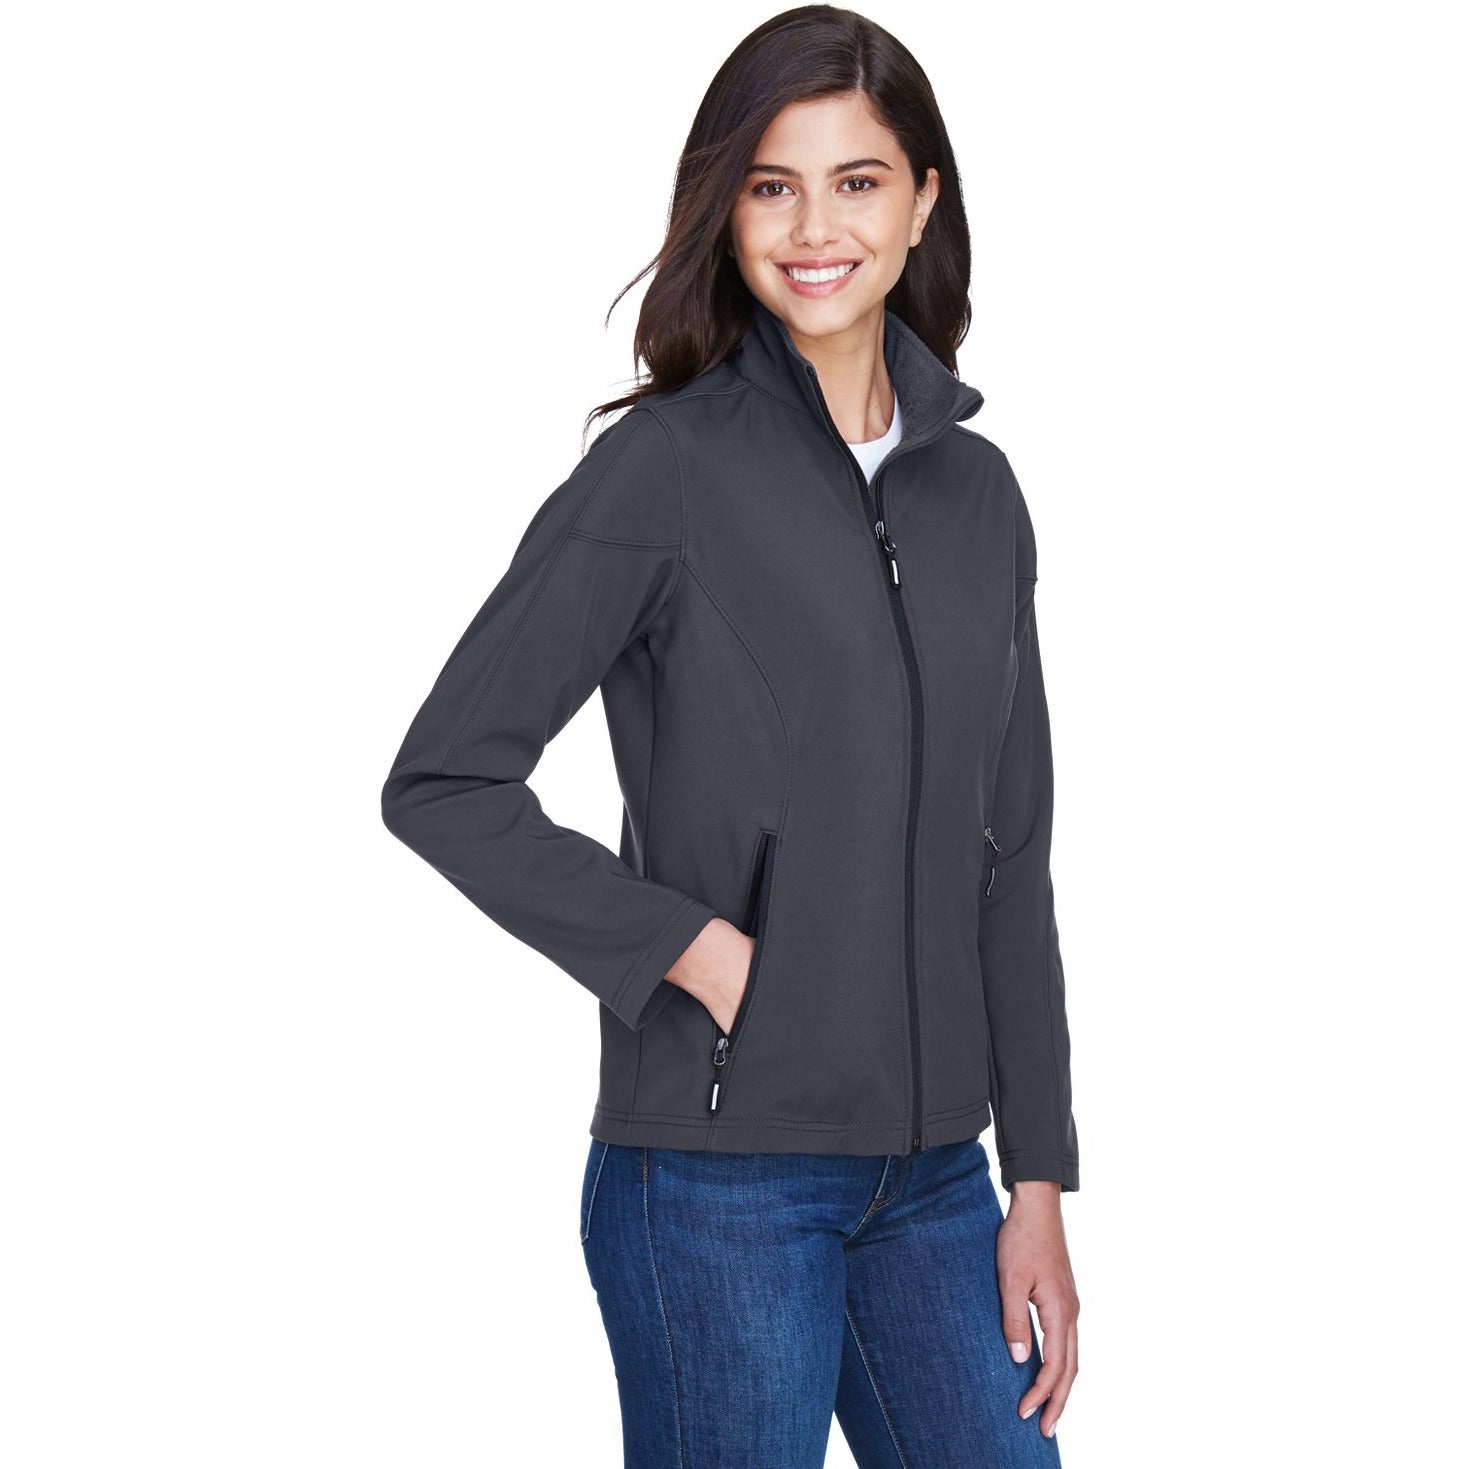 Ash City® Core 365 Ladies' Cruise Two-Layer Fleece Bonded Soft Shell Jacket